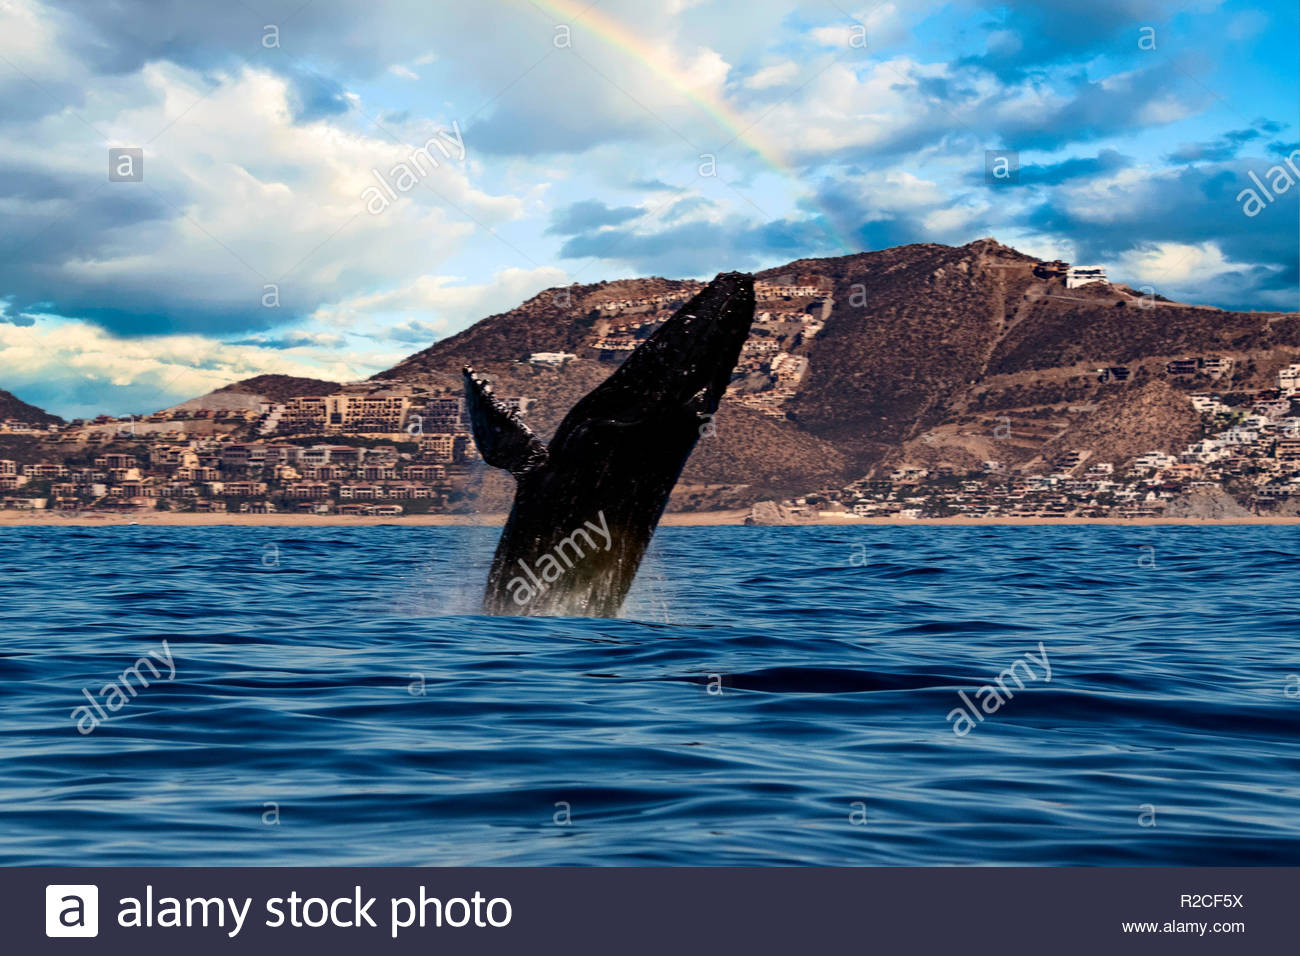 Humpback Whale Breaching On Pacific Ocean Background Near Cabo San